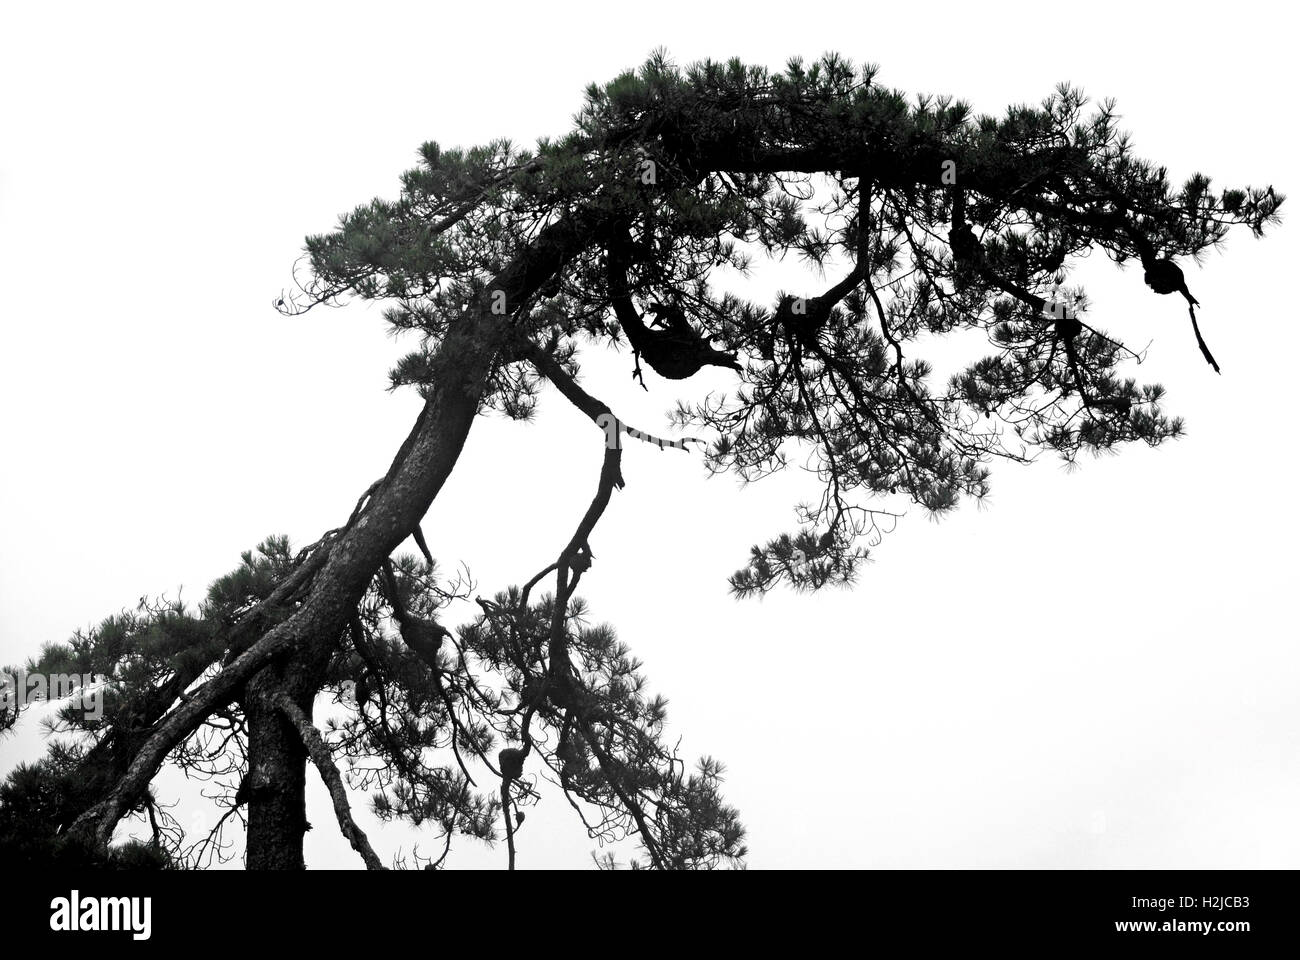 Huangshan pine silhouette. Several bird's nests can be seen on the branches. Stock Photo